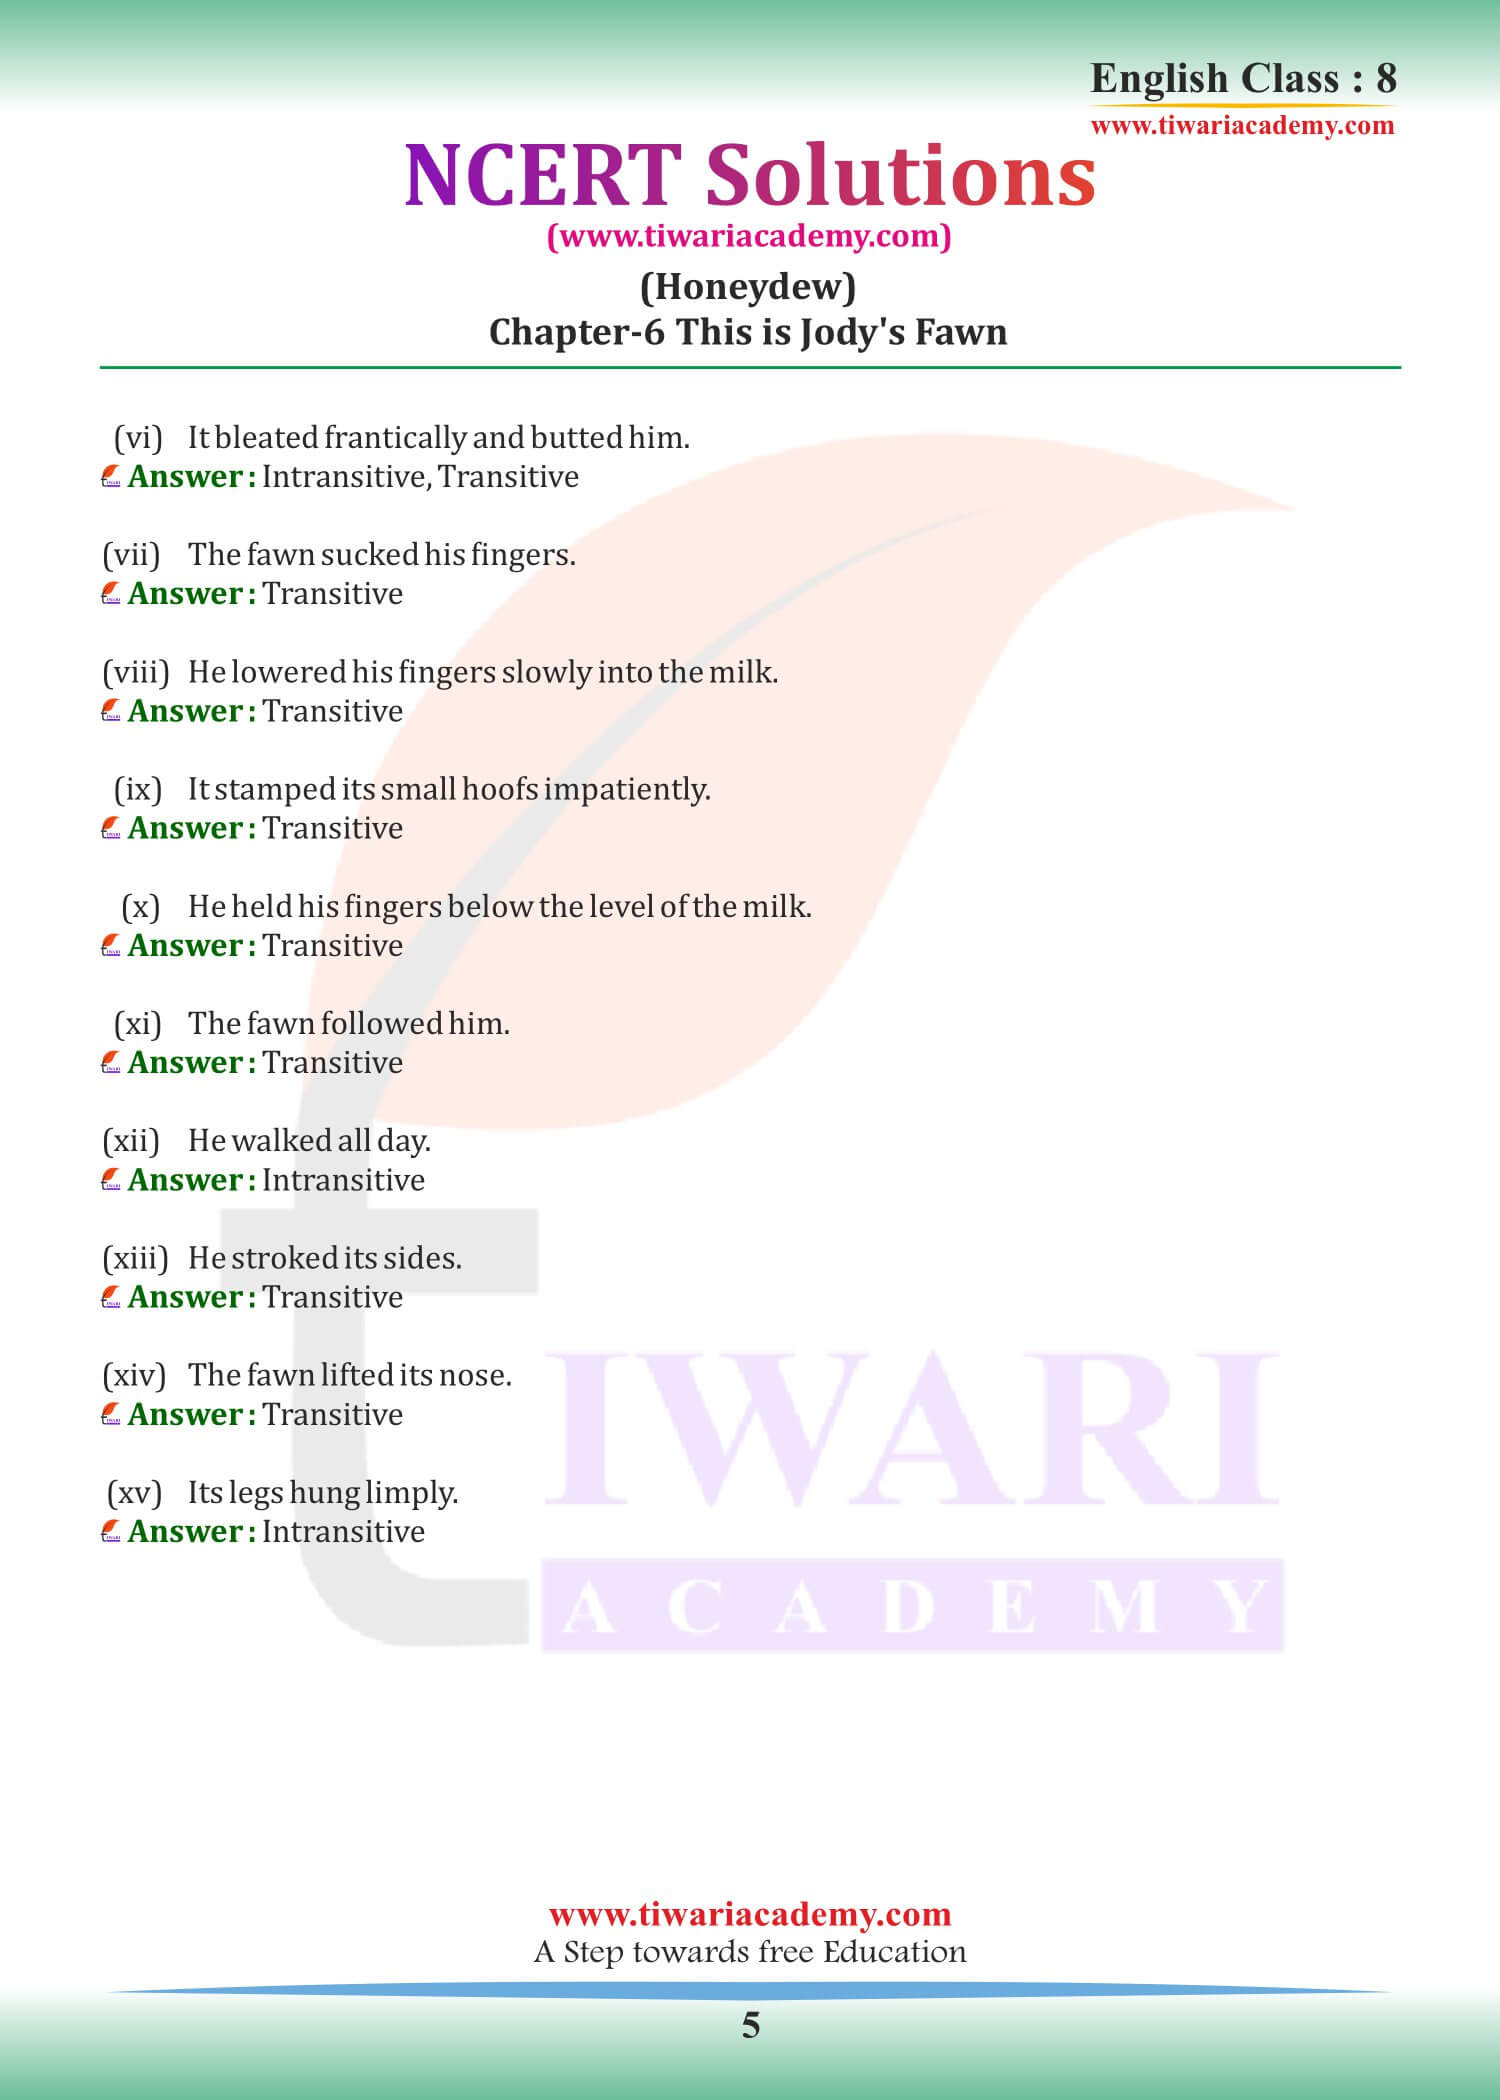 Class 8 English Honeydew Chapter 6 revised for new session